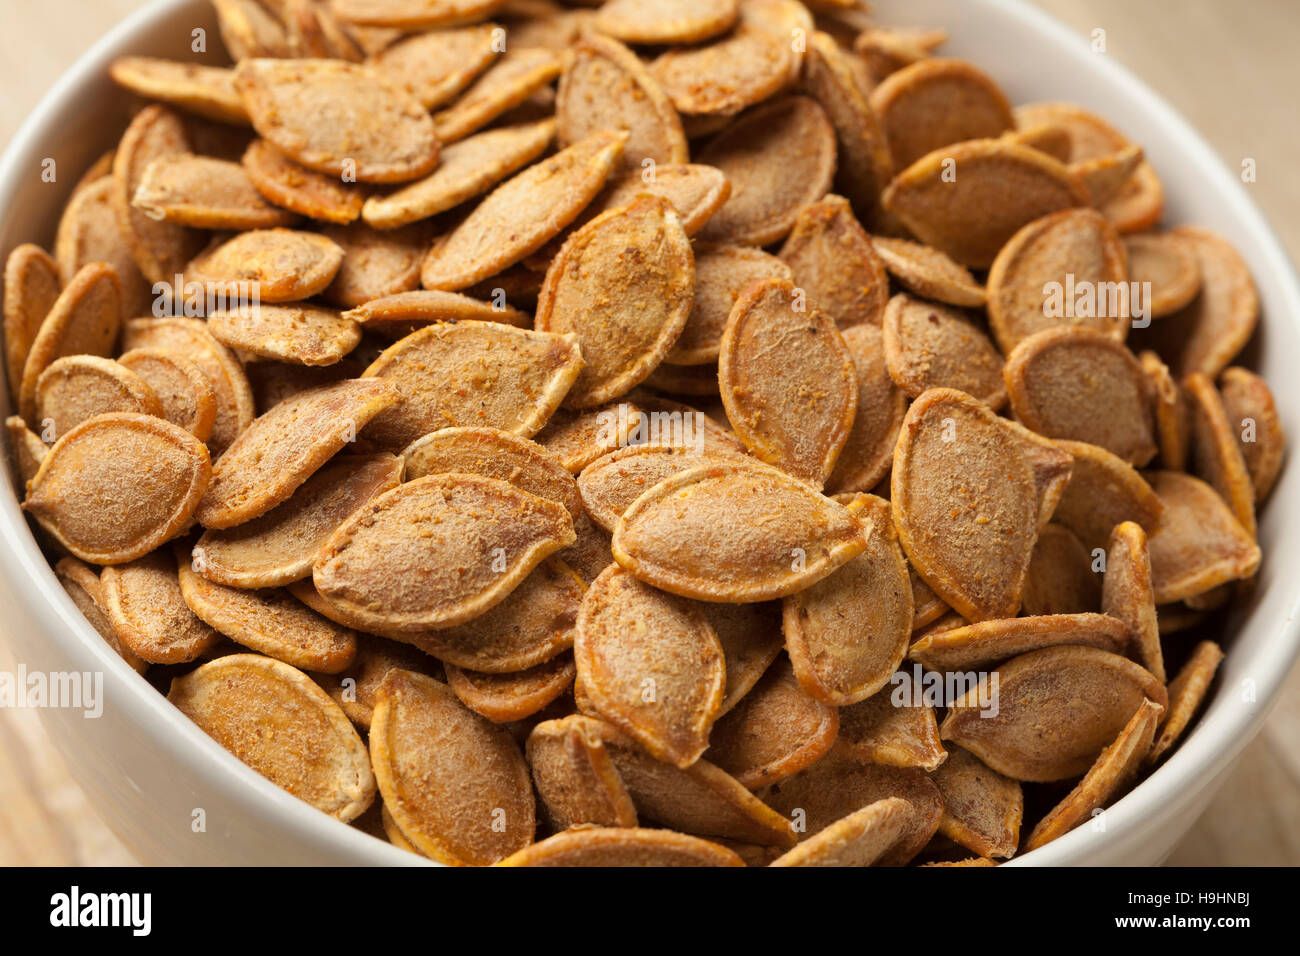 Bowl with spiced roasted pumpkin seeds Stock Photo